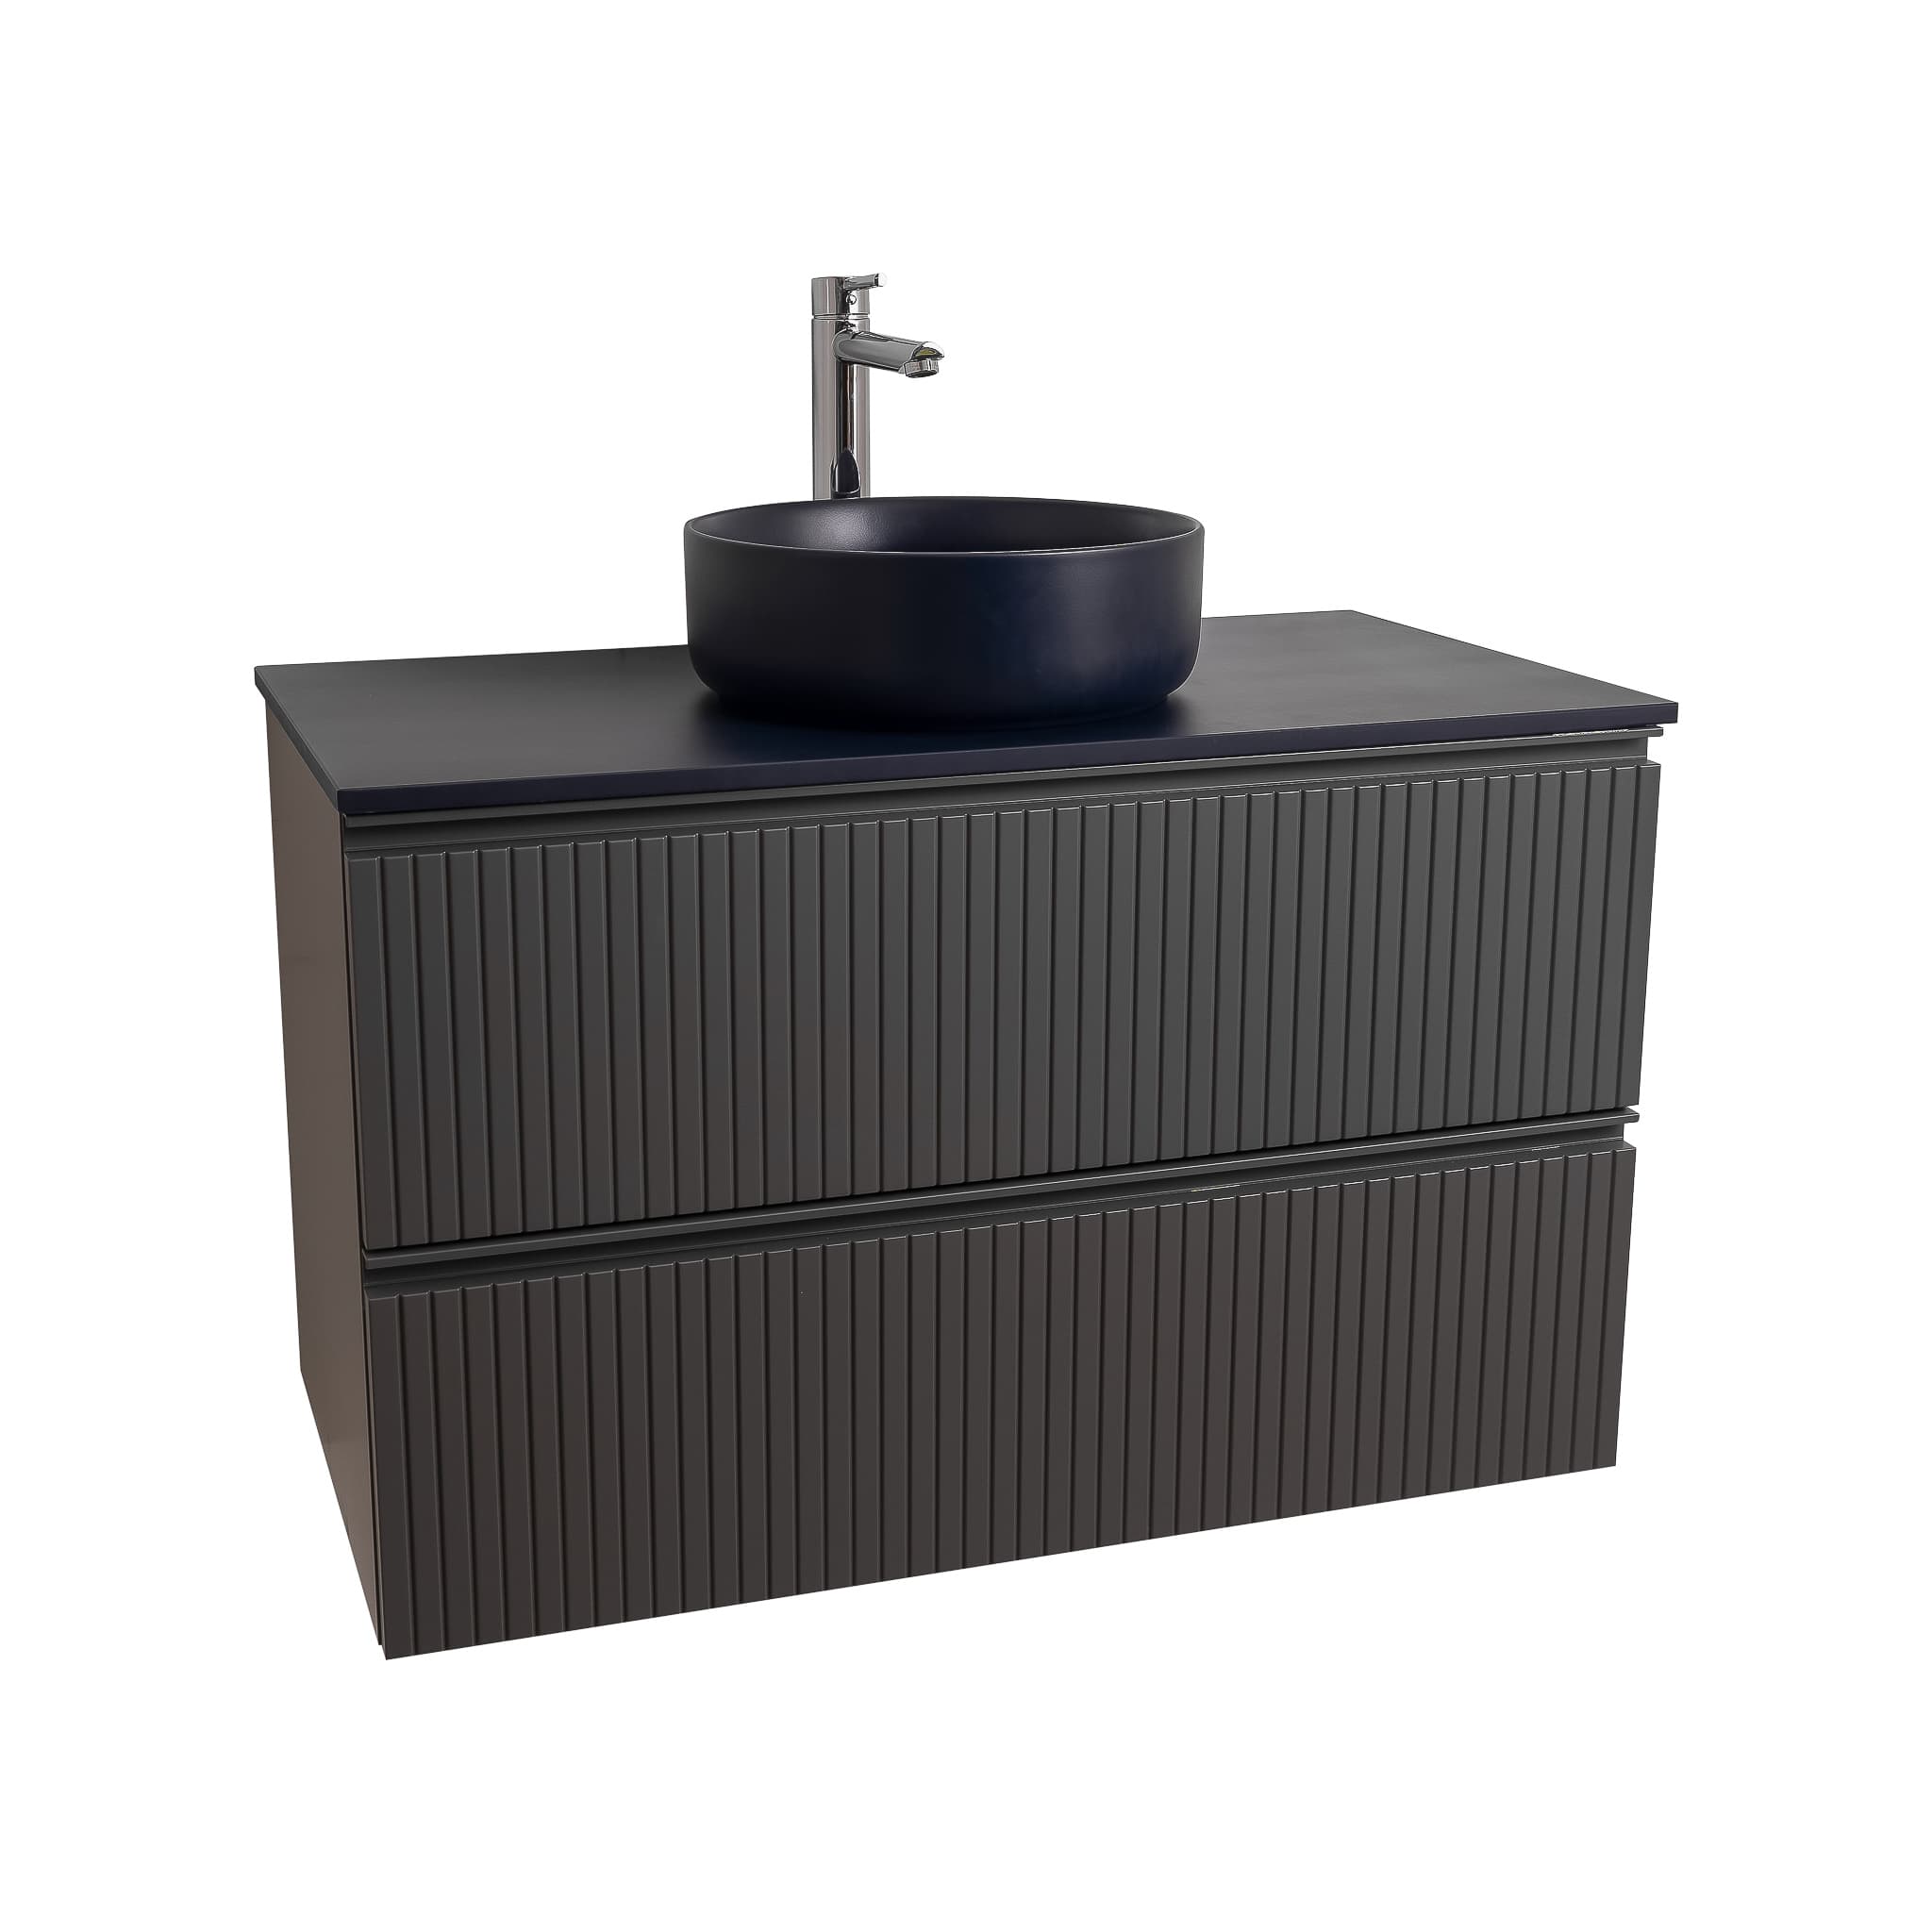 Ares 35.5 Matte Grey Cabinet, Ares Navy Blue Top And Ares Navy Blue Ceramic Basin, Wall Mounted Modern Vanity Set